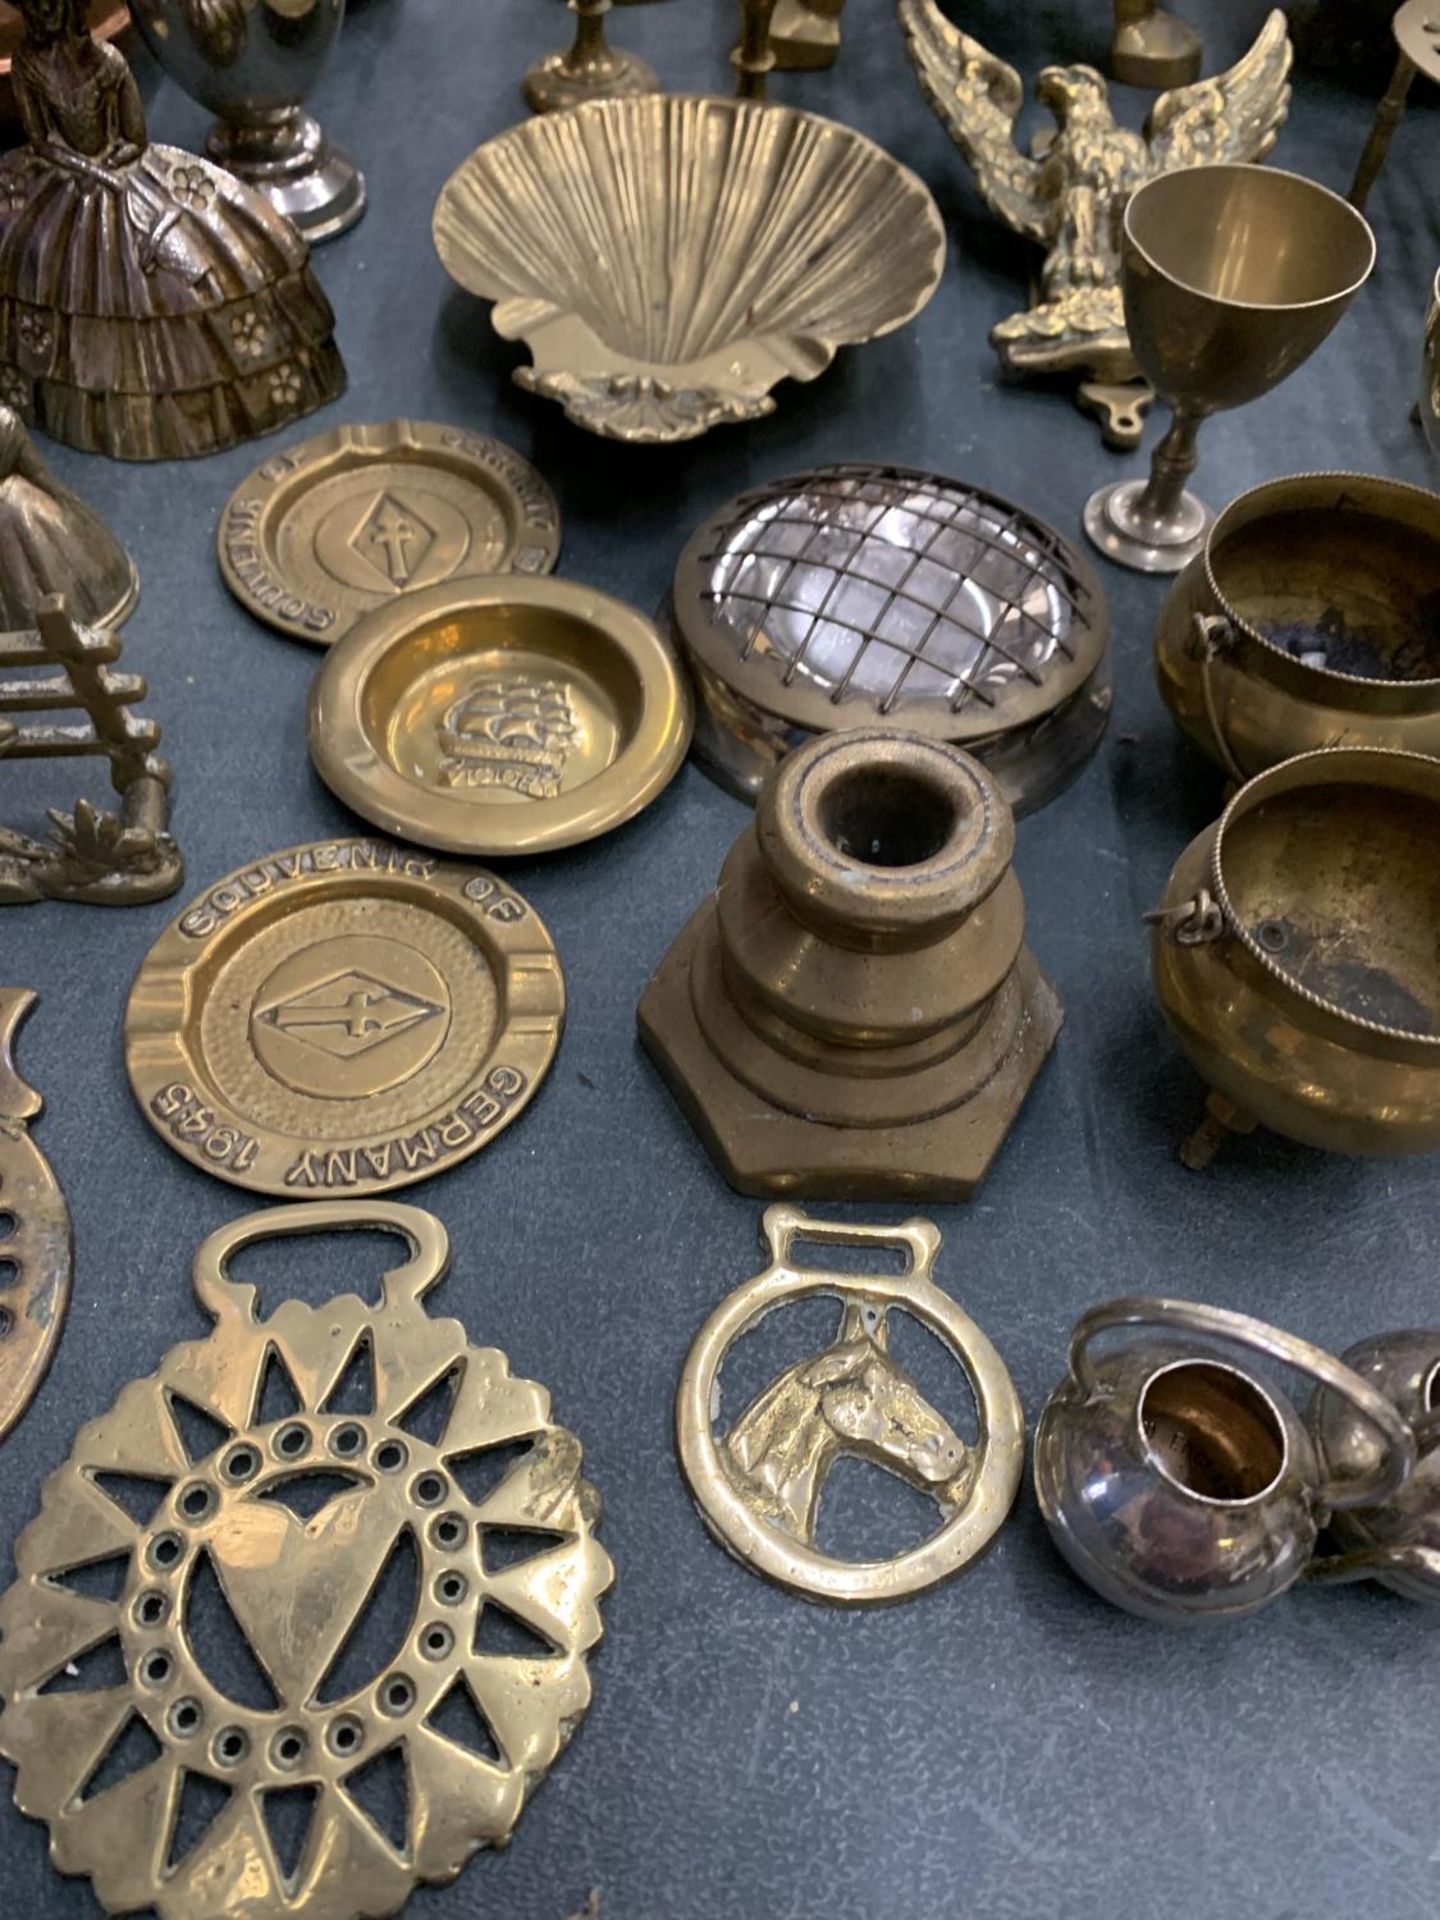 A LARGE COLLECTION OF BRASS AND COPPER WARE TO INCLUDE TRIVETS, BELLS, BOWLS, HORSE BRASSES ETC. - Image 3 of 7